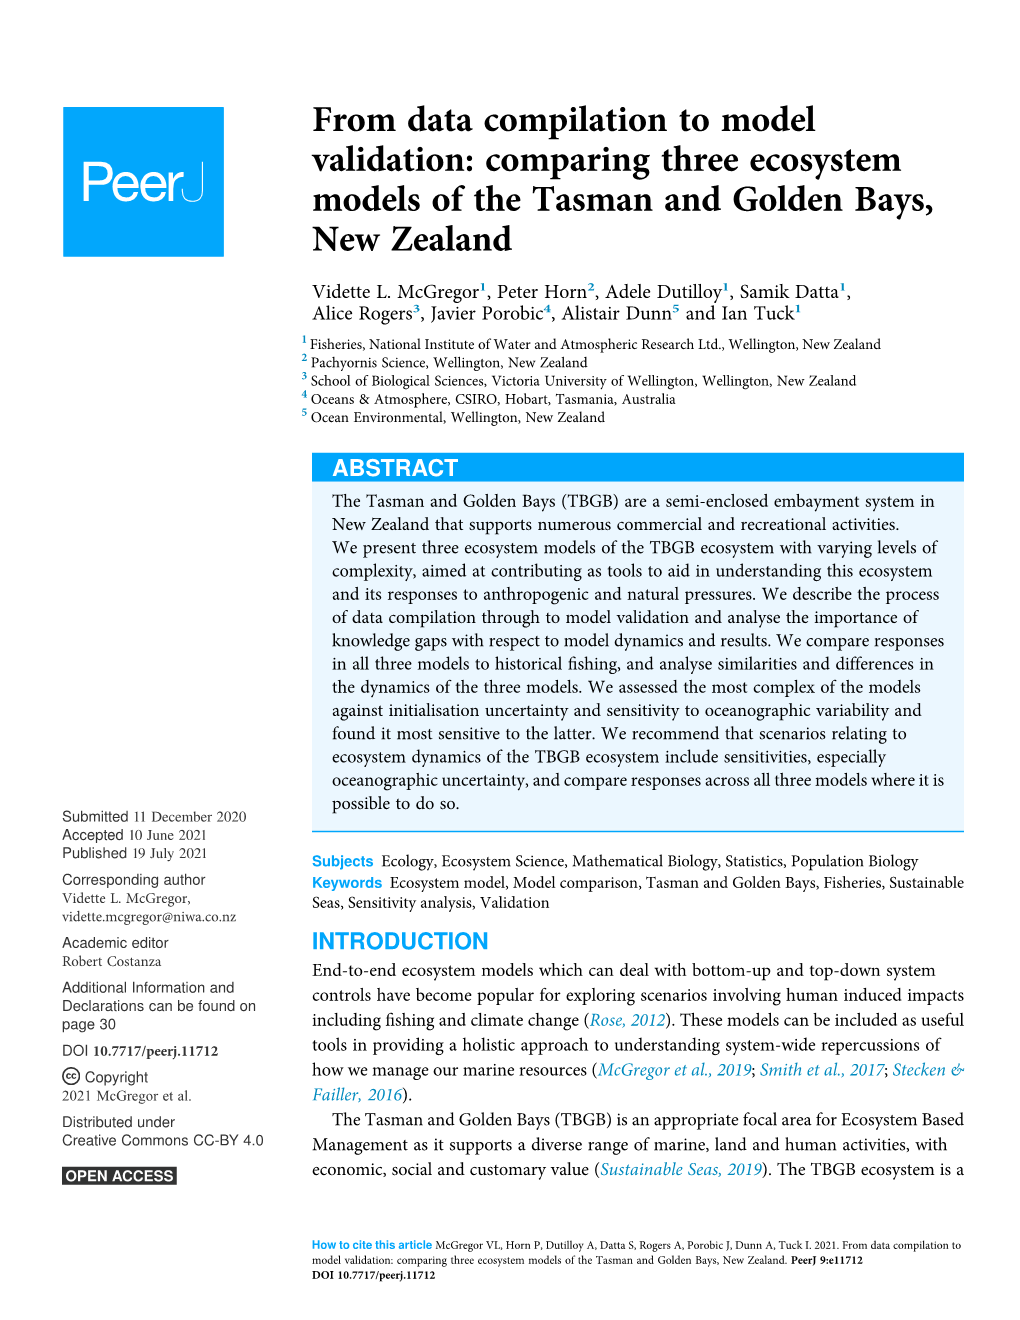 Comparing Three Ecosystem Models of the Tasman and Golden Bays, New Zealand